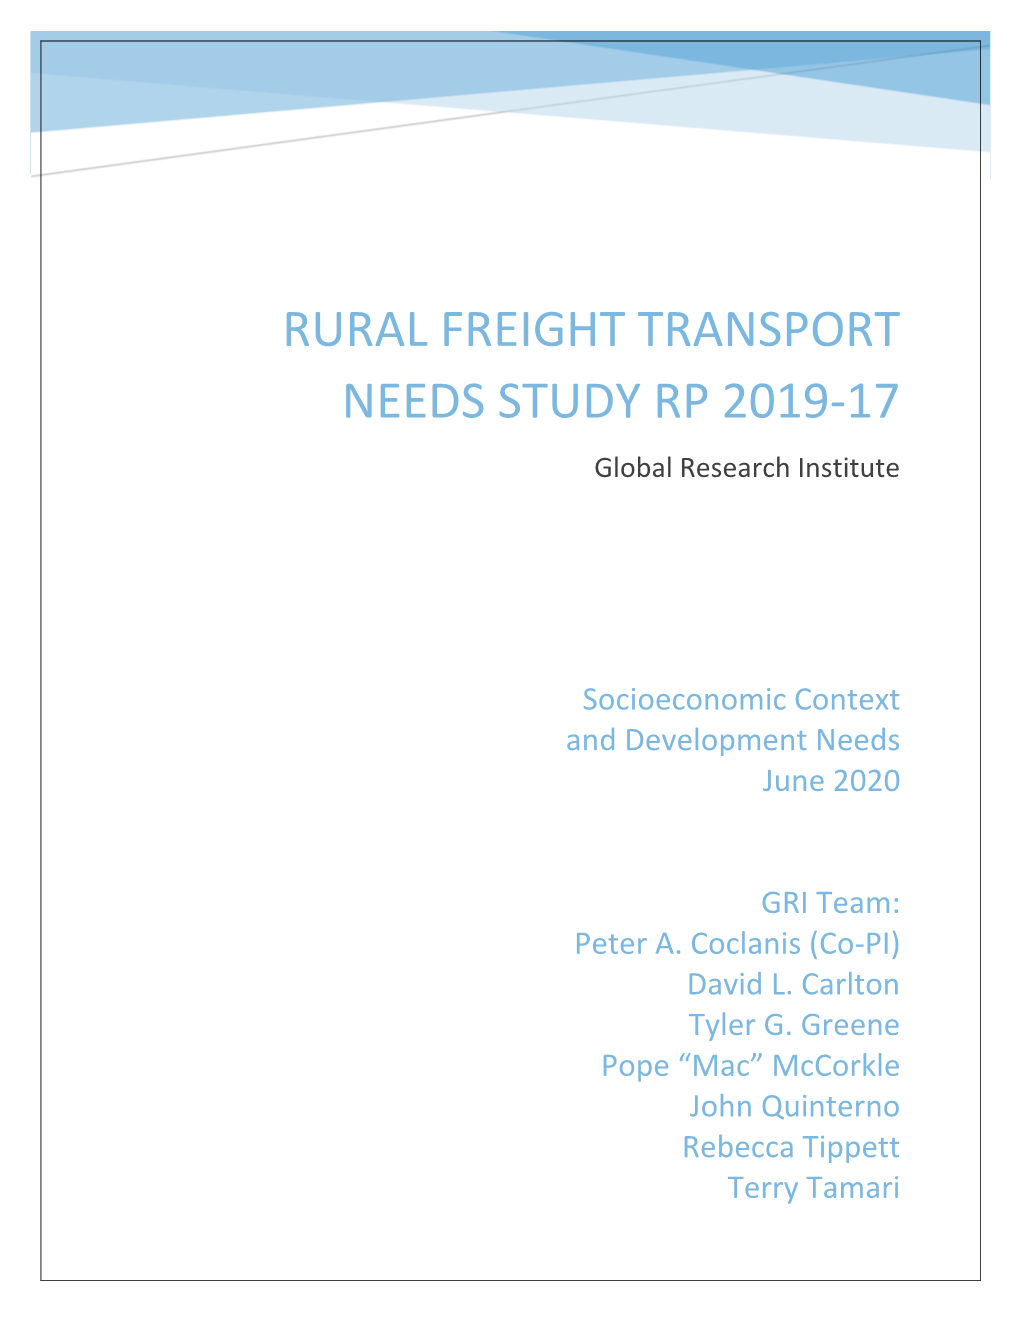 RURAL FREIGHT TRANSPORT NEEDS STUDY RP 2019-17 Global Research Institute